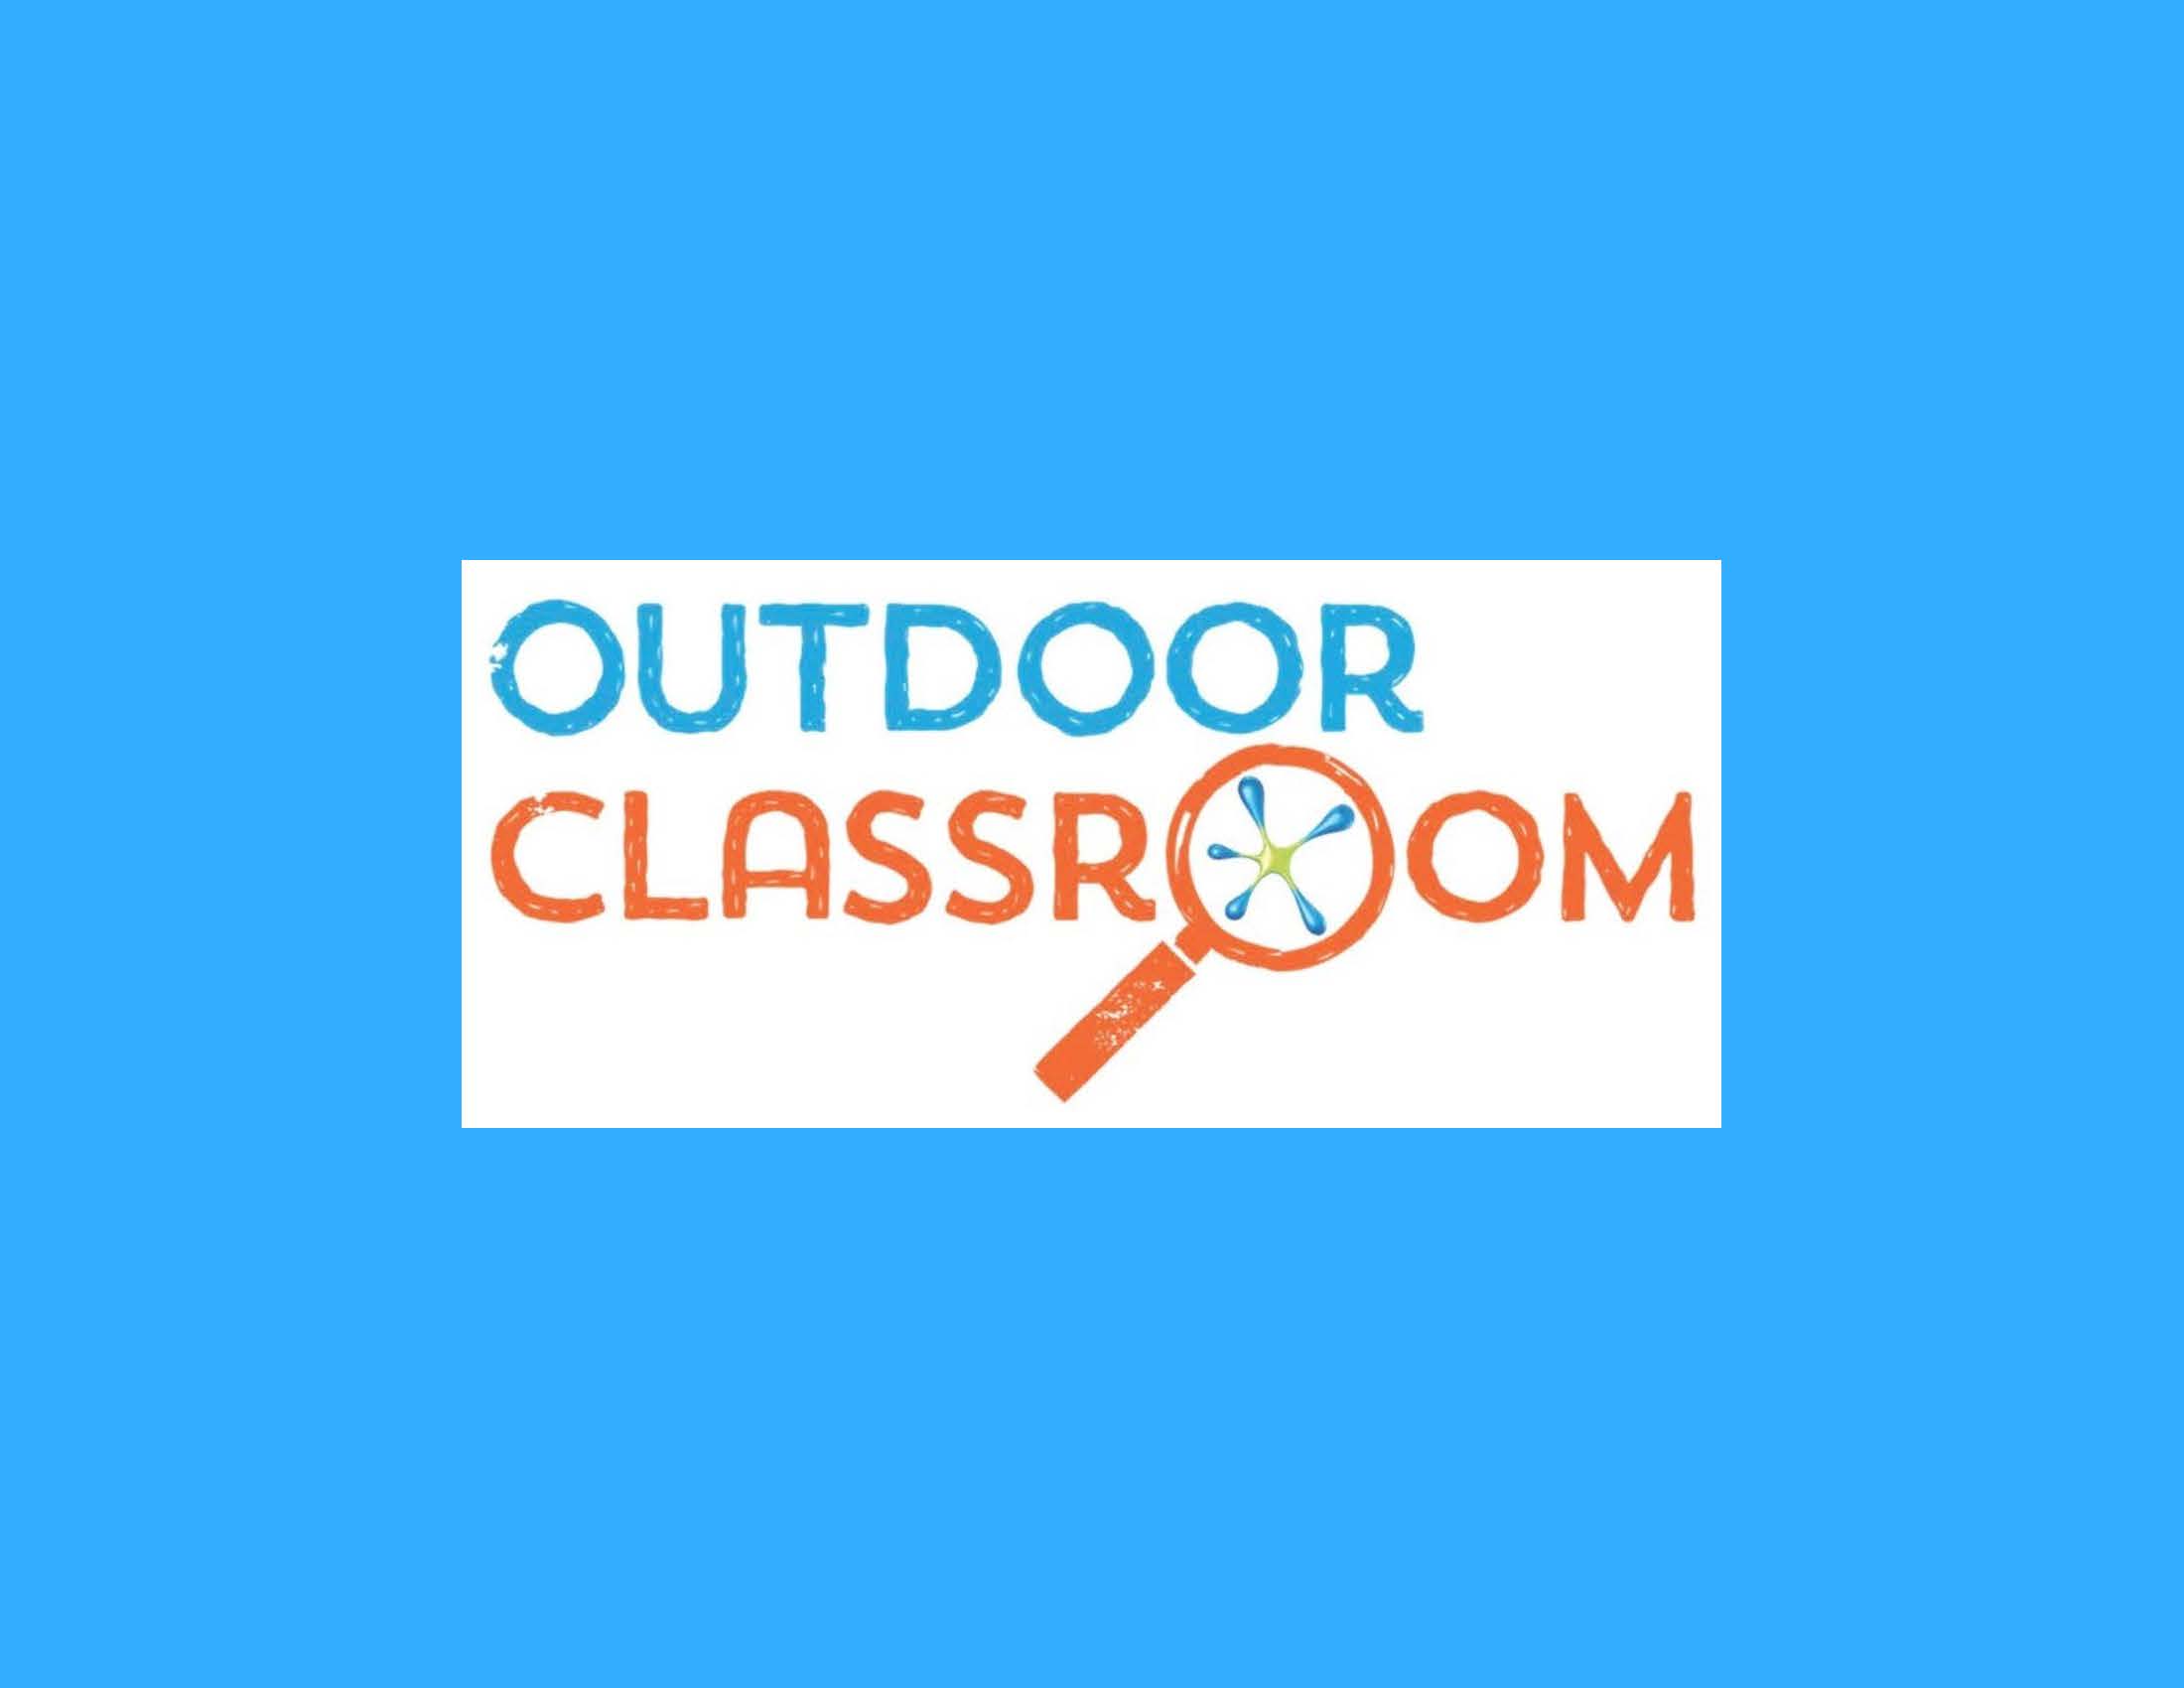 Outdoor Classroom with Background.jpg